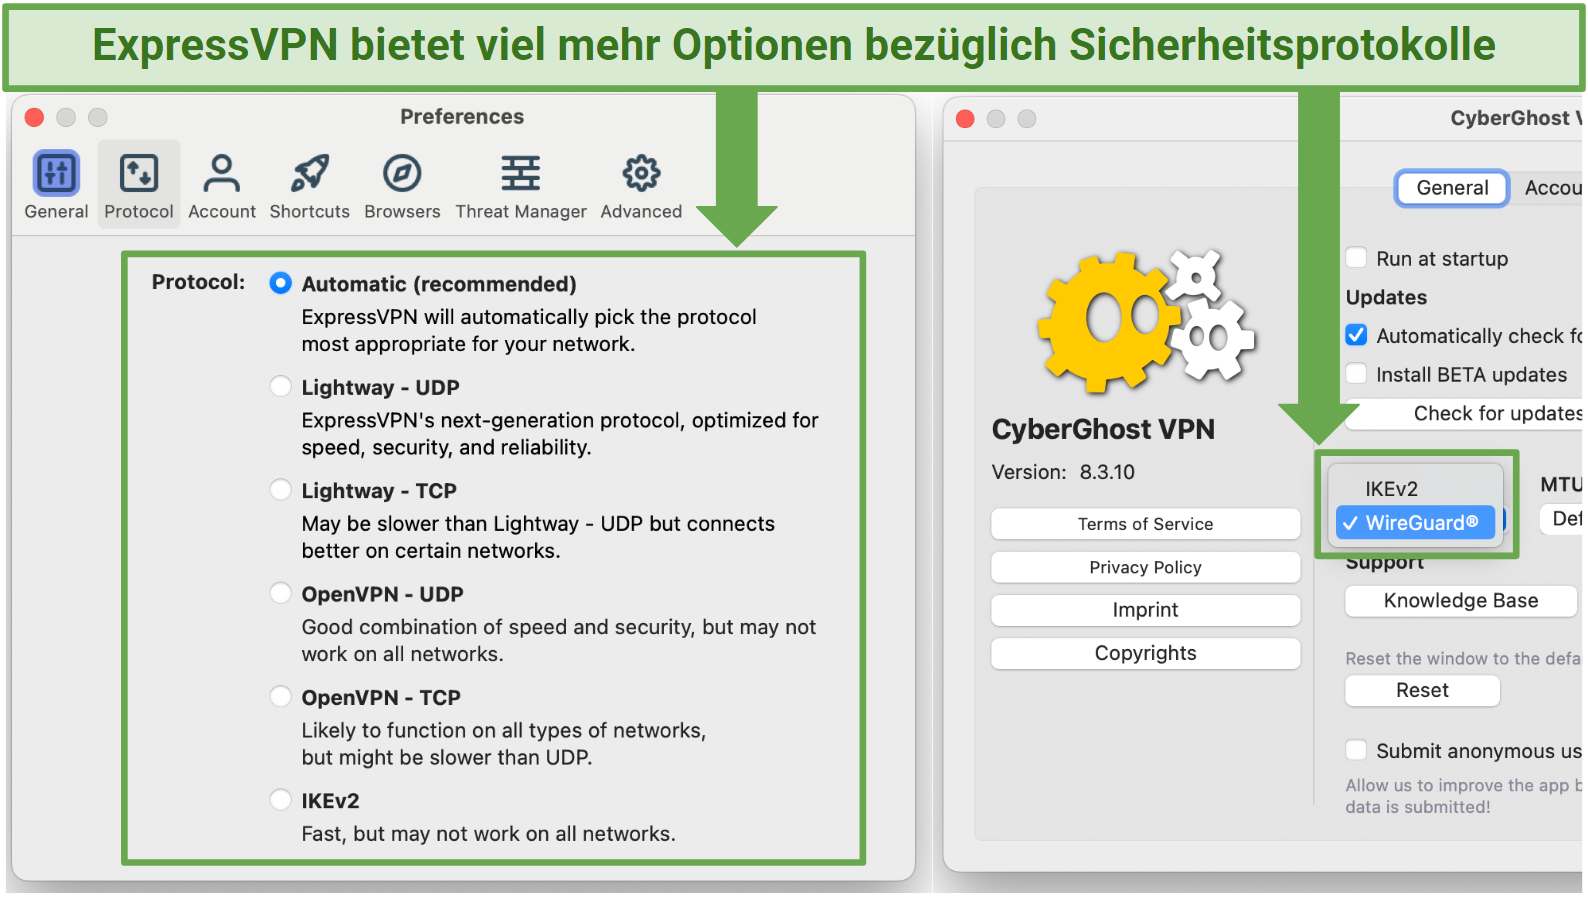 Screenshot showing the ExpressVPN and CyberGhost protocol options